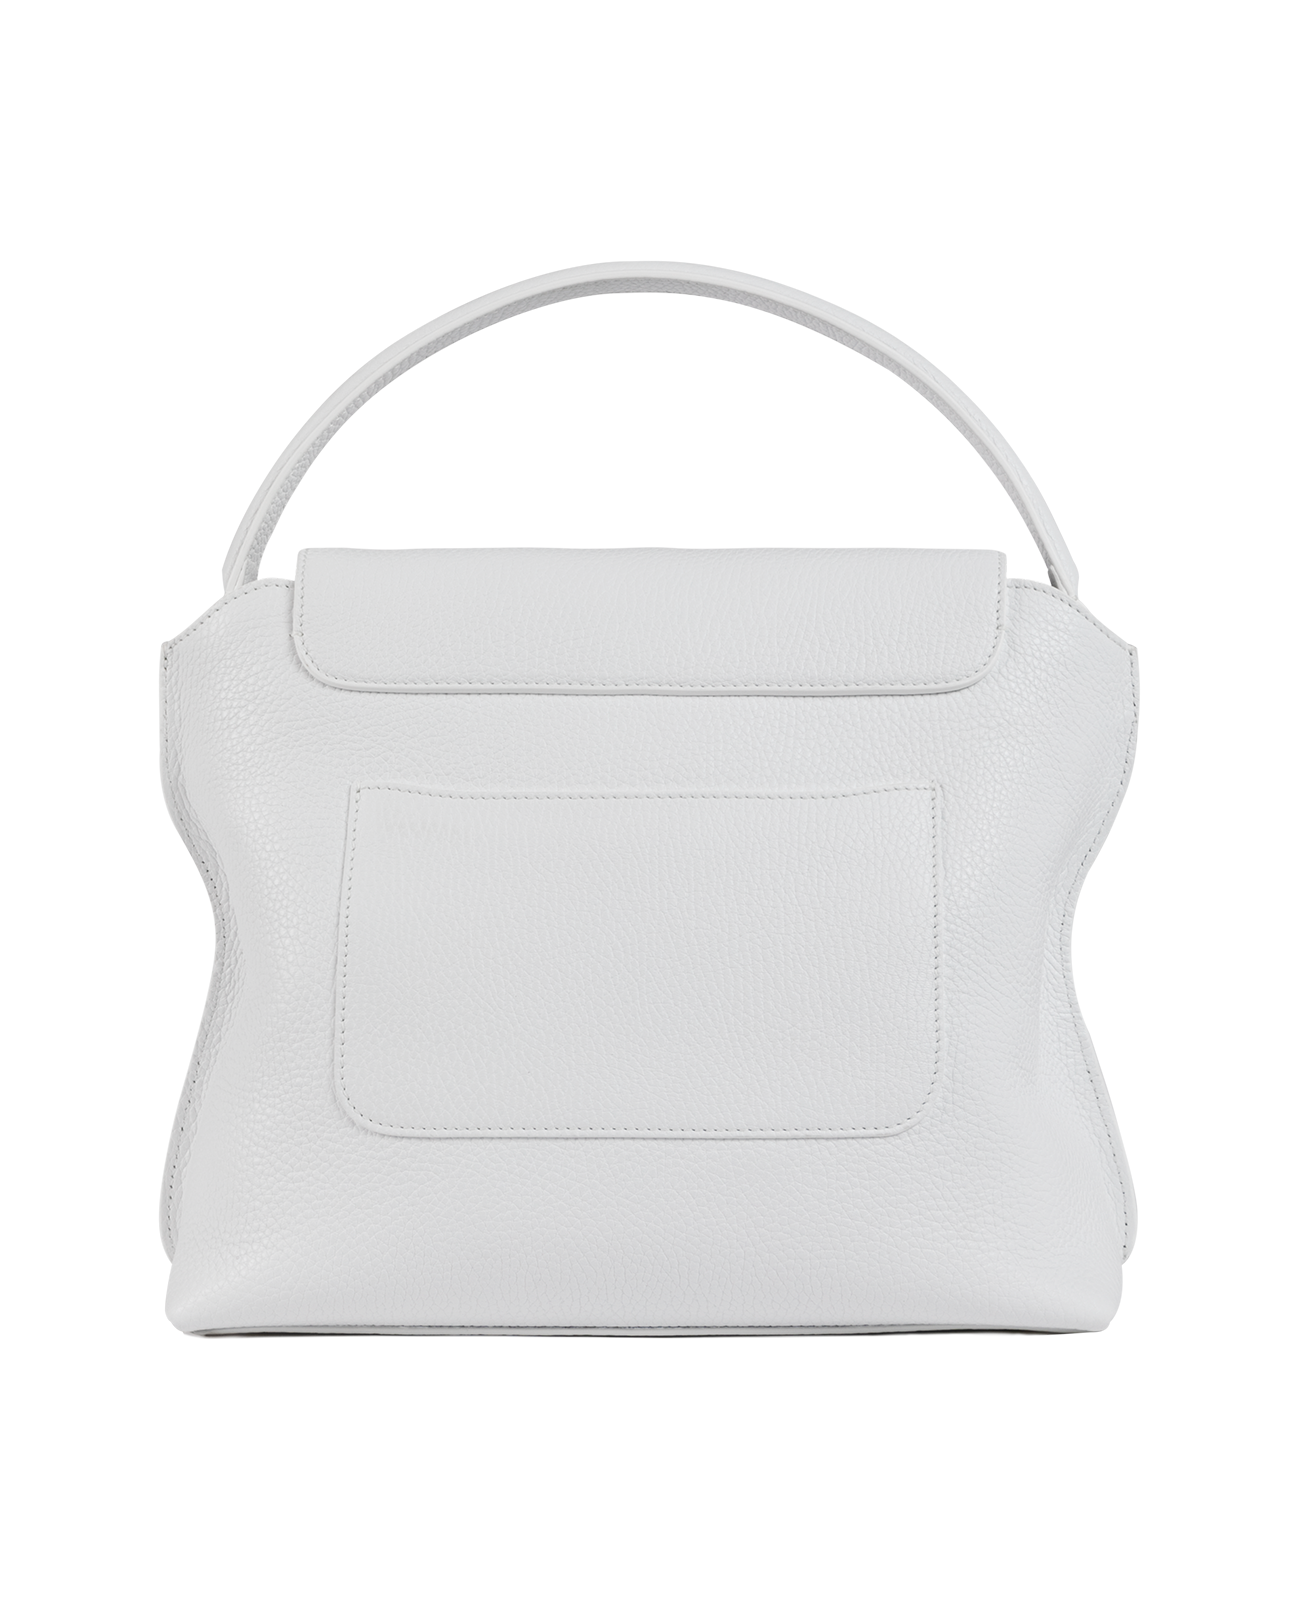 Cross-body bag in Italian full-grain leather, semi-aniline calf Italian leather with detachable shoulder strap.Three compartments, zip pocket in the back compartment. Magnetic flap closure with logo. Color: White. Size: Large